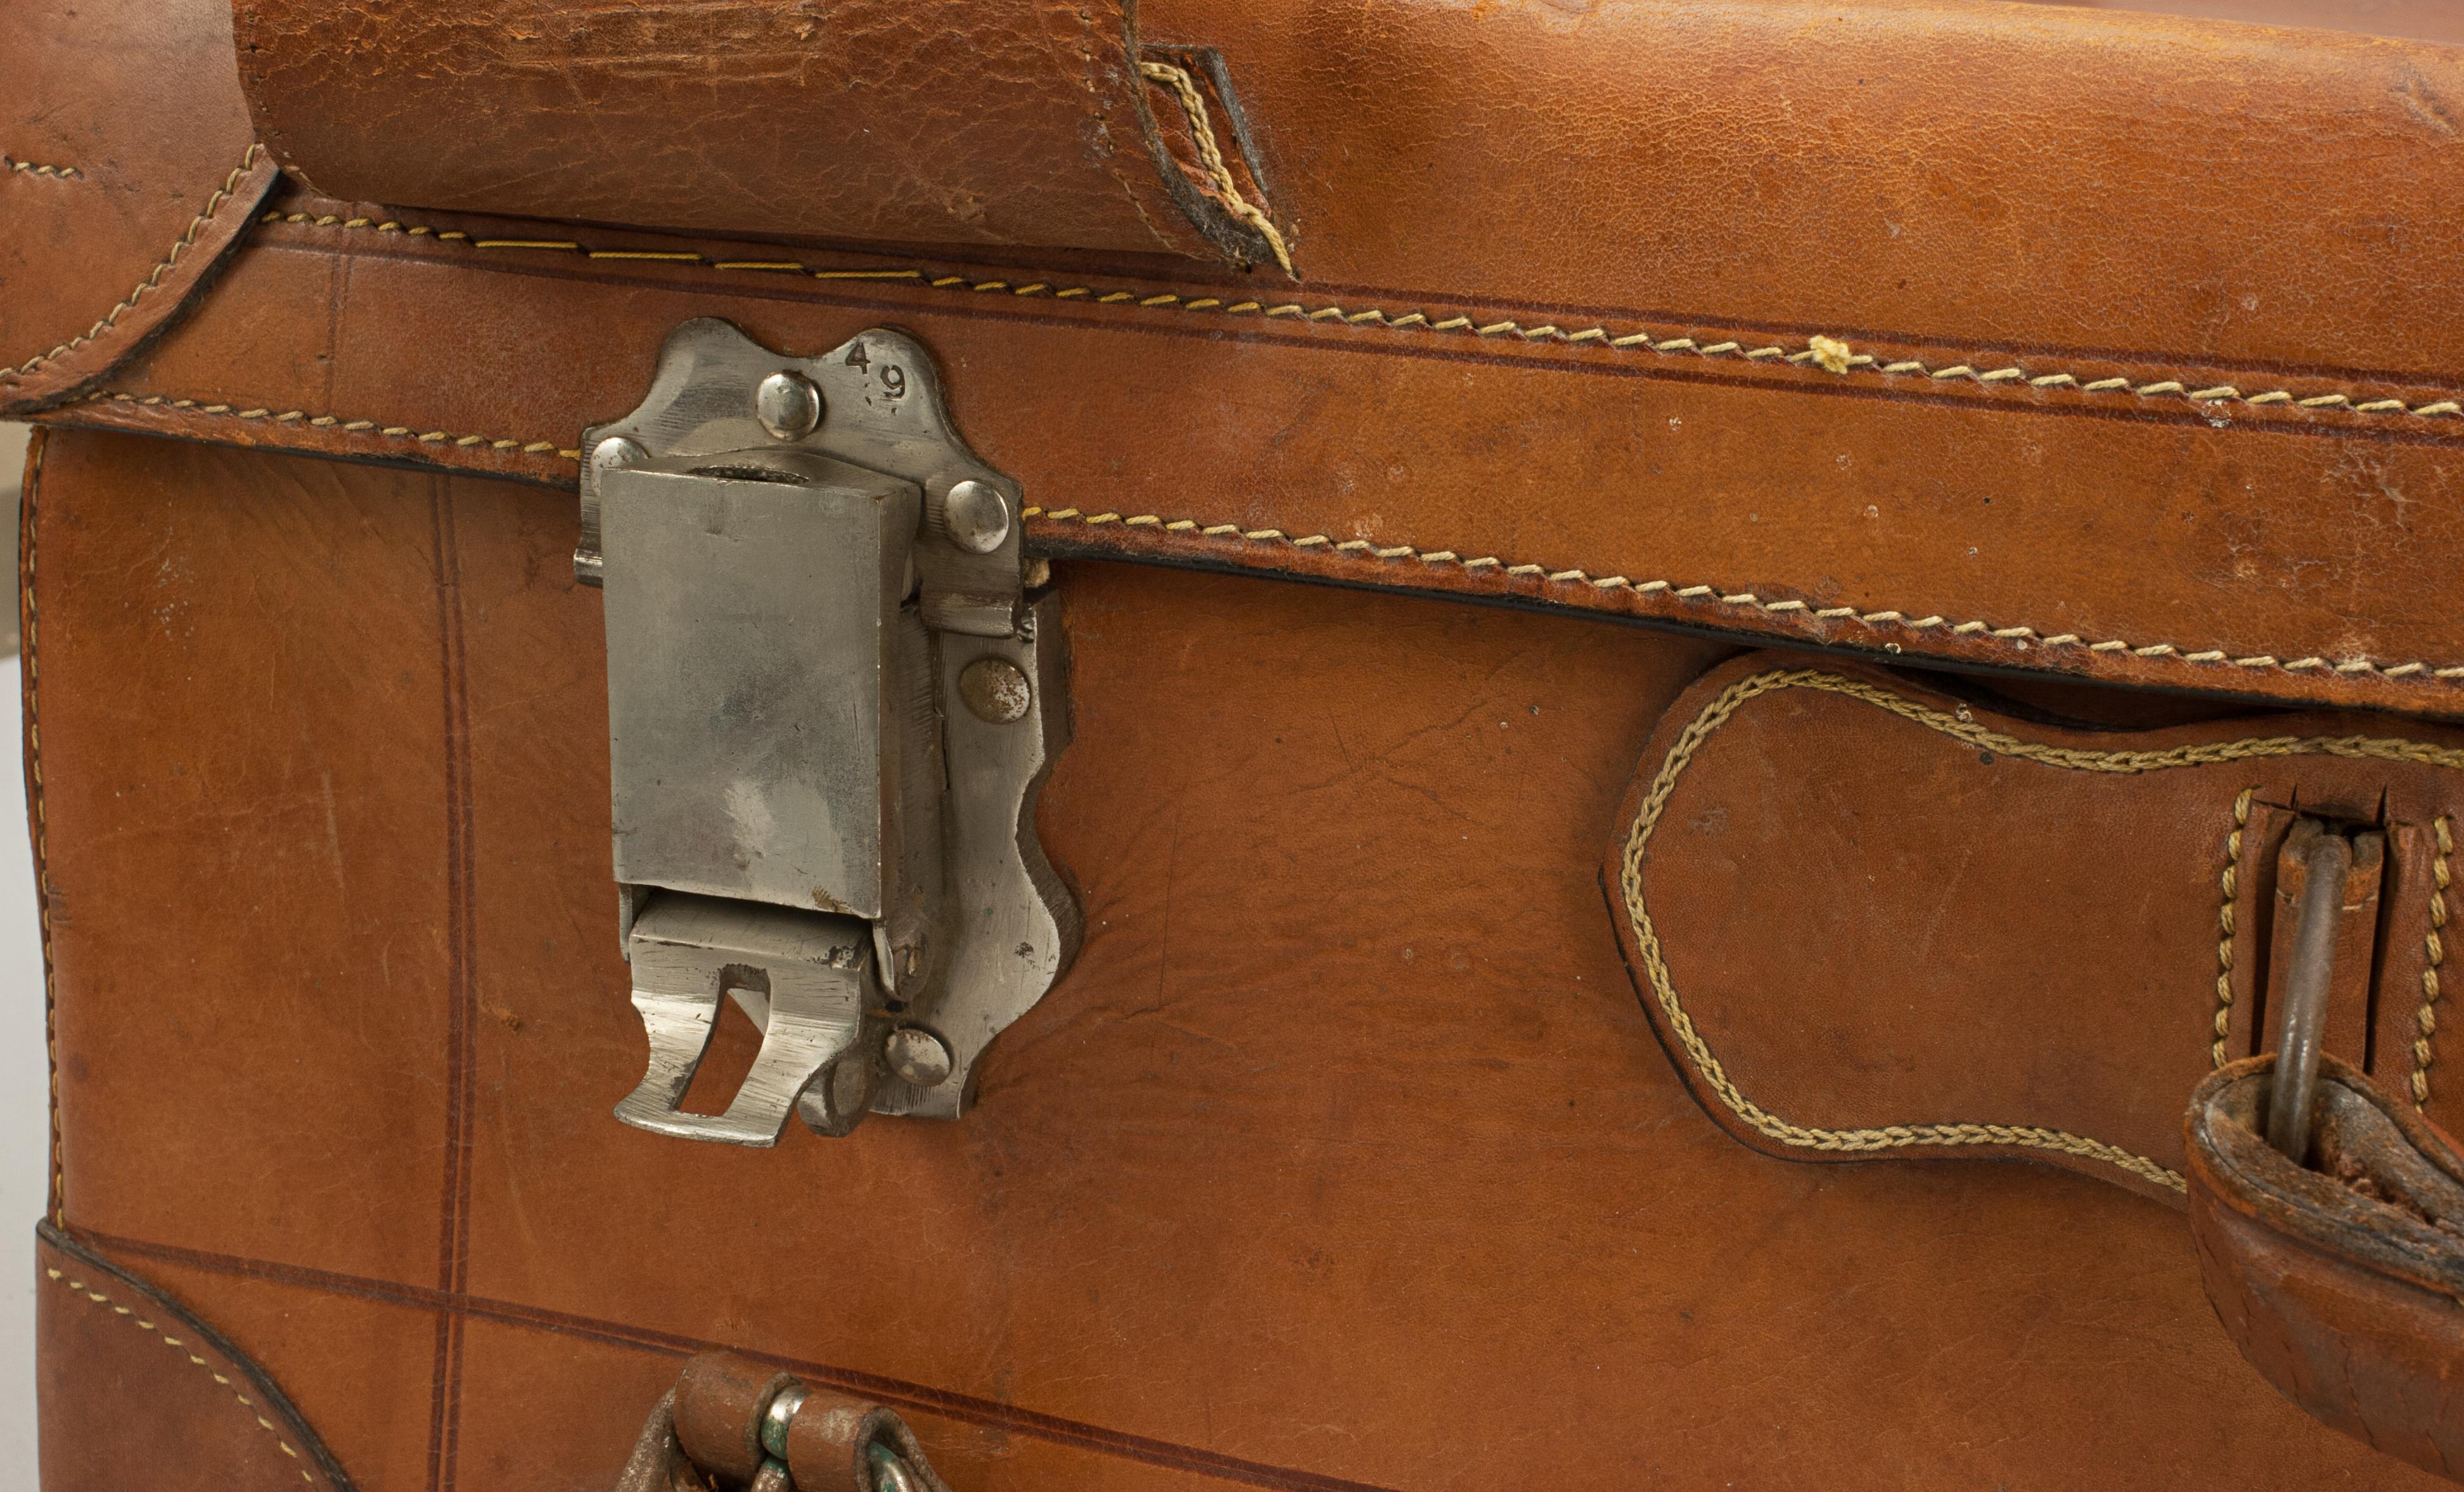 Antique Leather Suitcase, Travelling Luggage or Motoring Case In Good Condition For Sale In Oxfordshire, GB